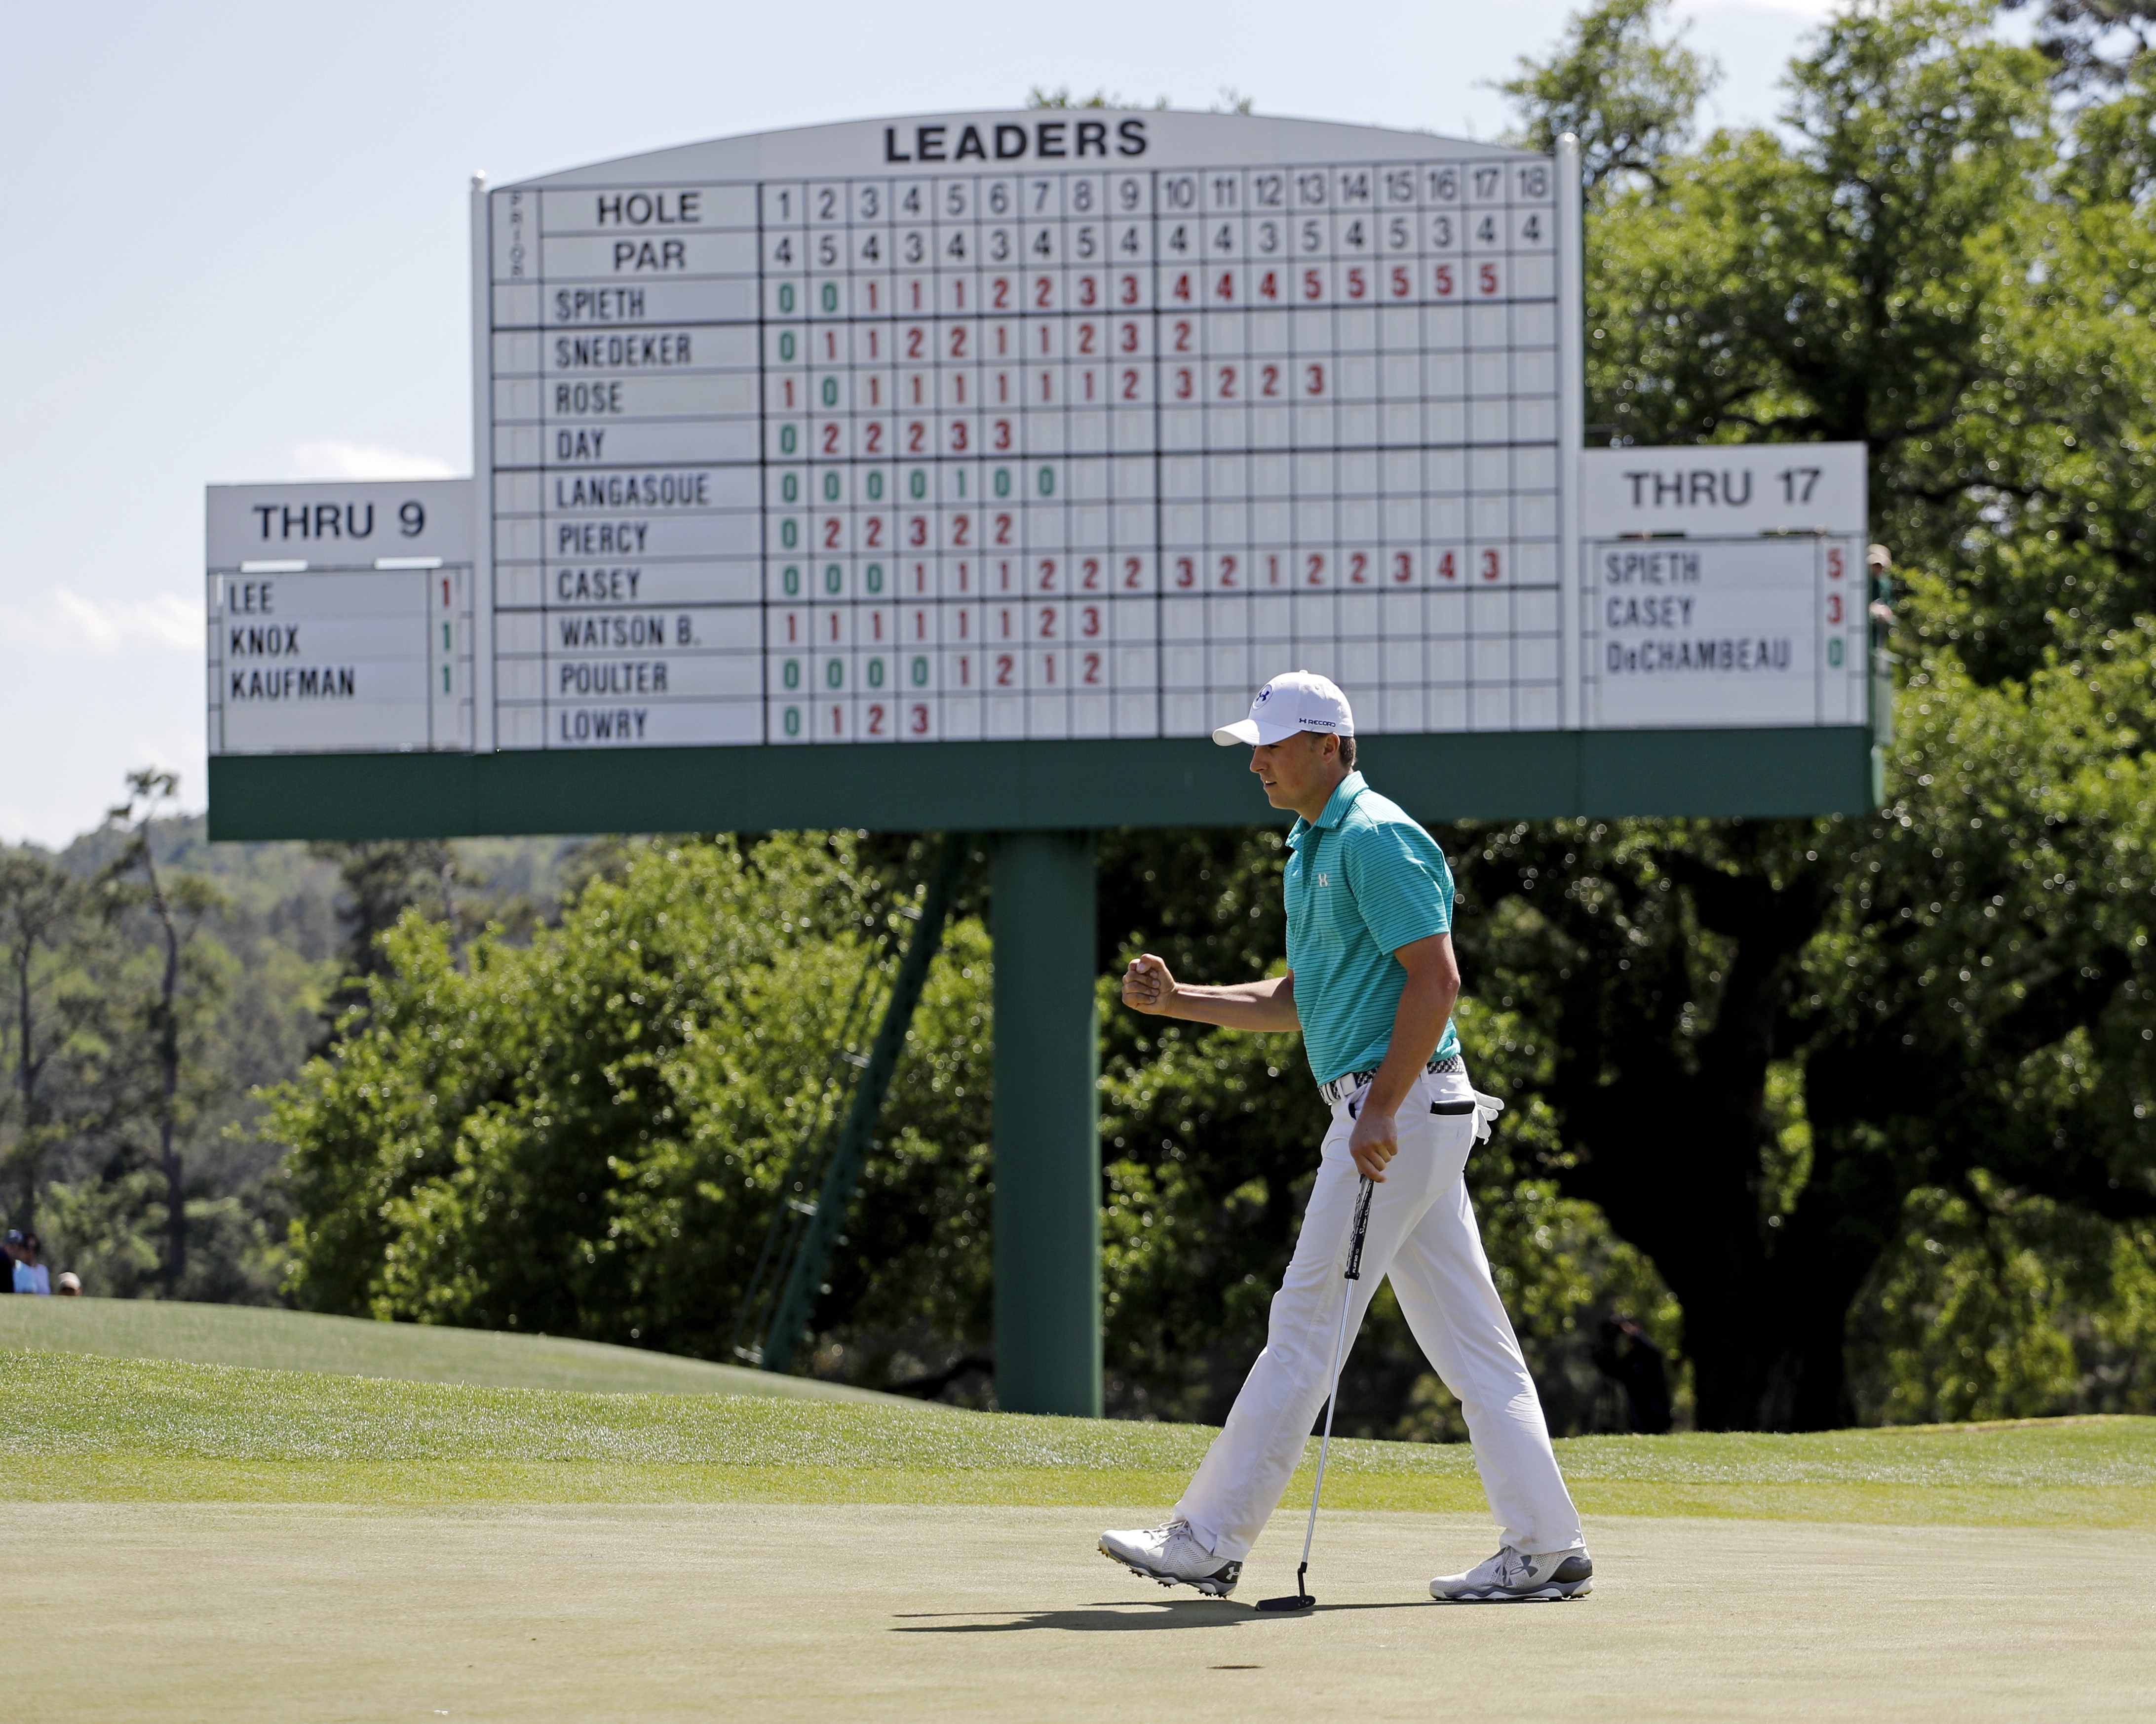 Jordan Spieth punches the air after a birdie on the 18th hole during the first round of the Masters golf tournament Thursday, April 7, 2016, in Augusta, Georgia. AP